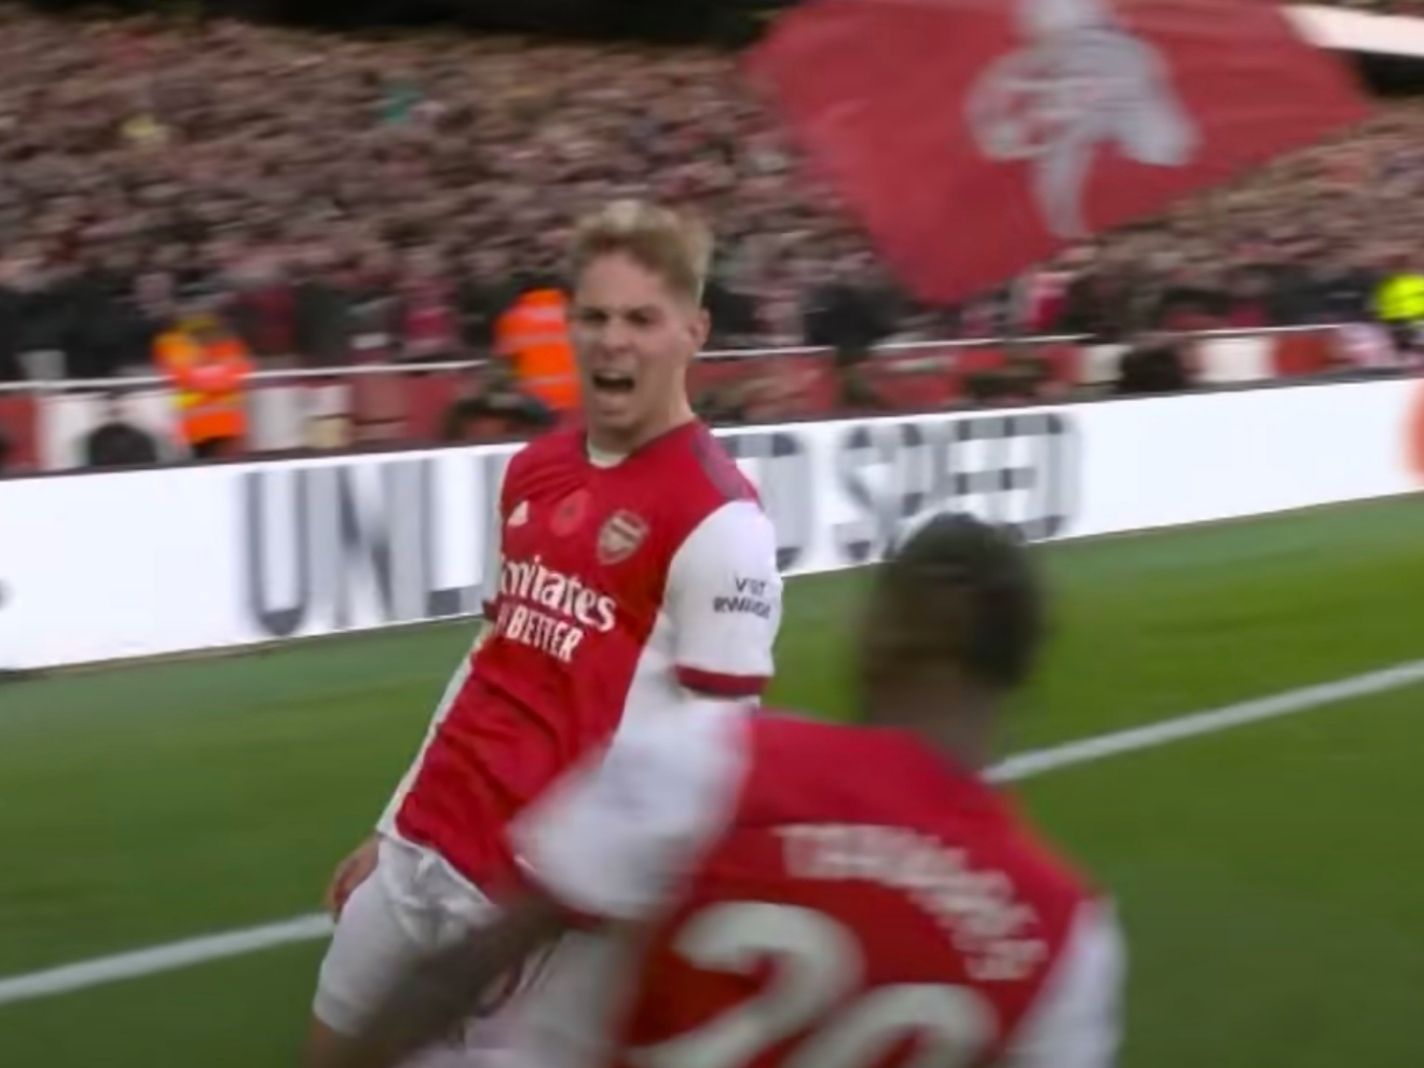 Nuno Tavares timing his knee slide to match Emile Smith Rowe was oddly satisfying